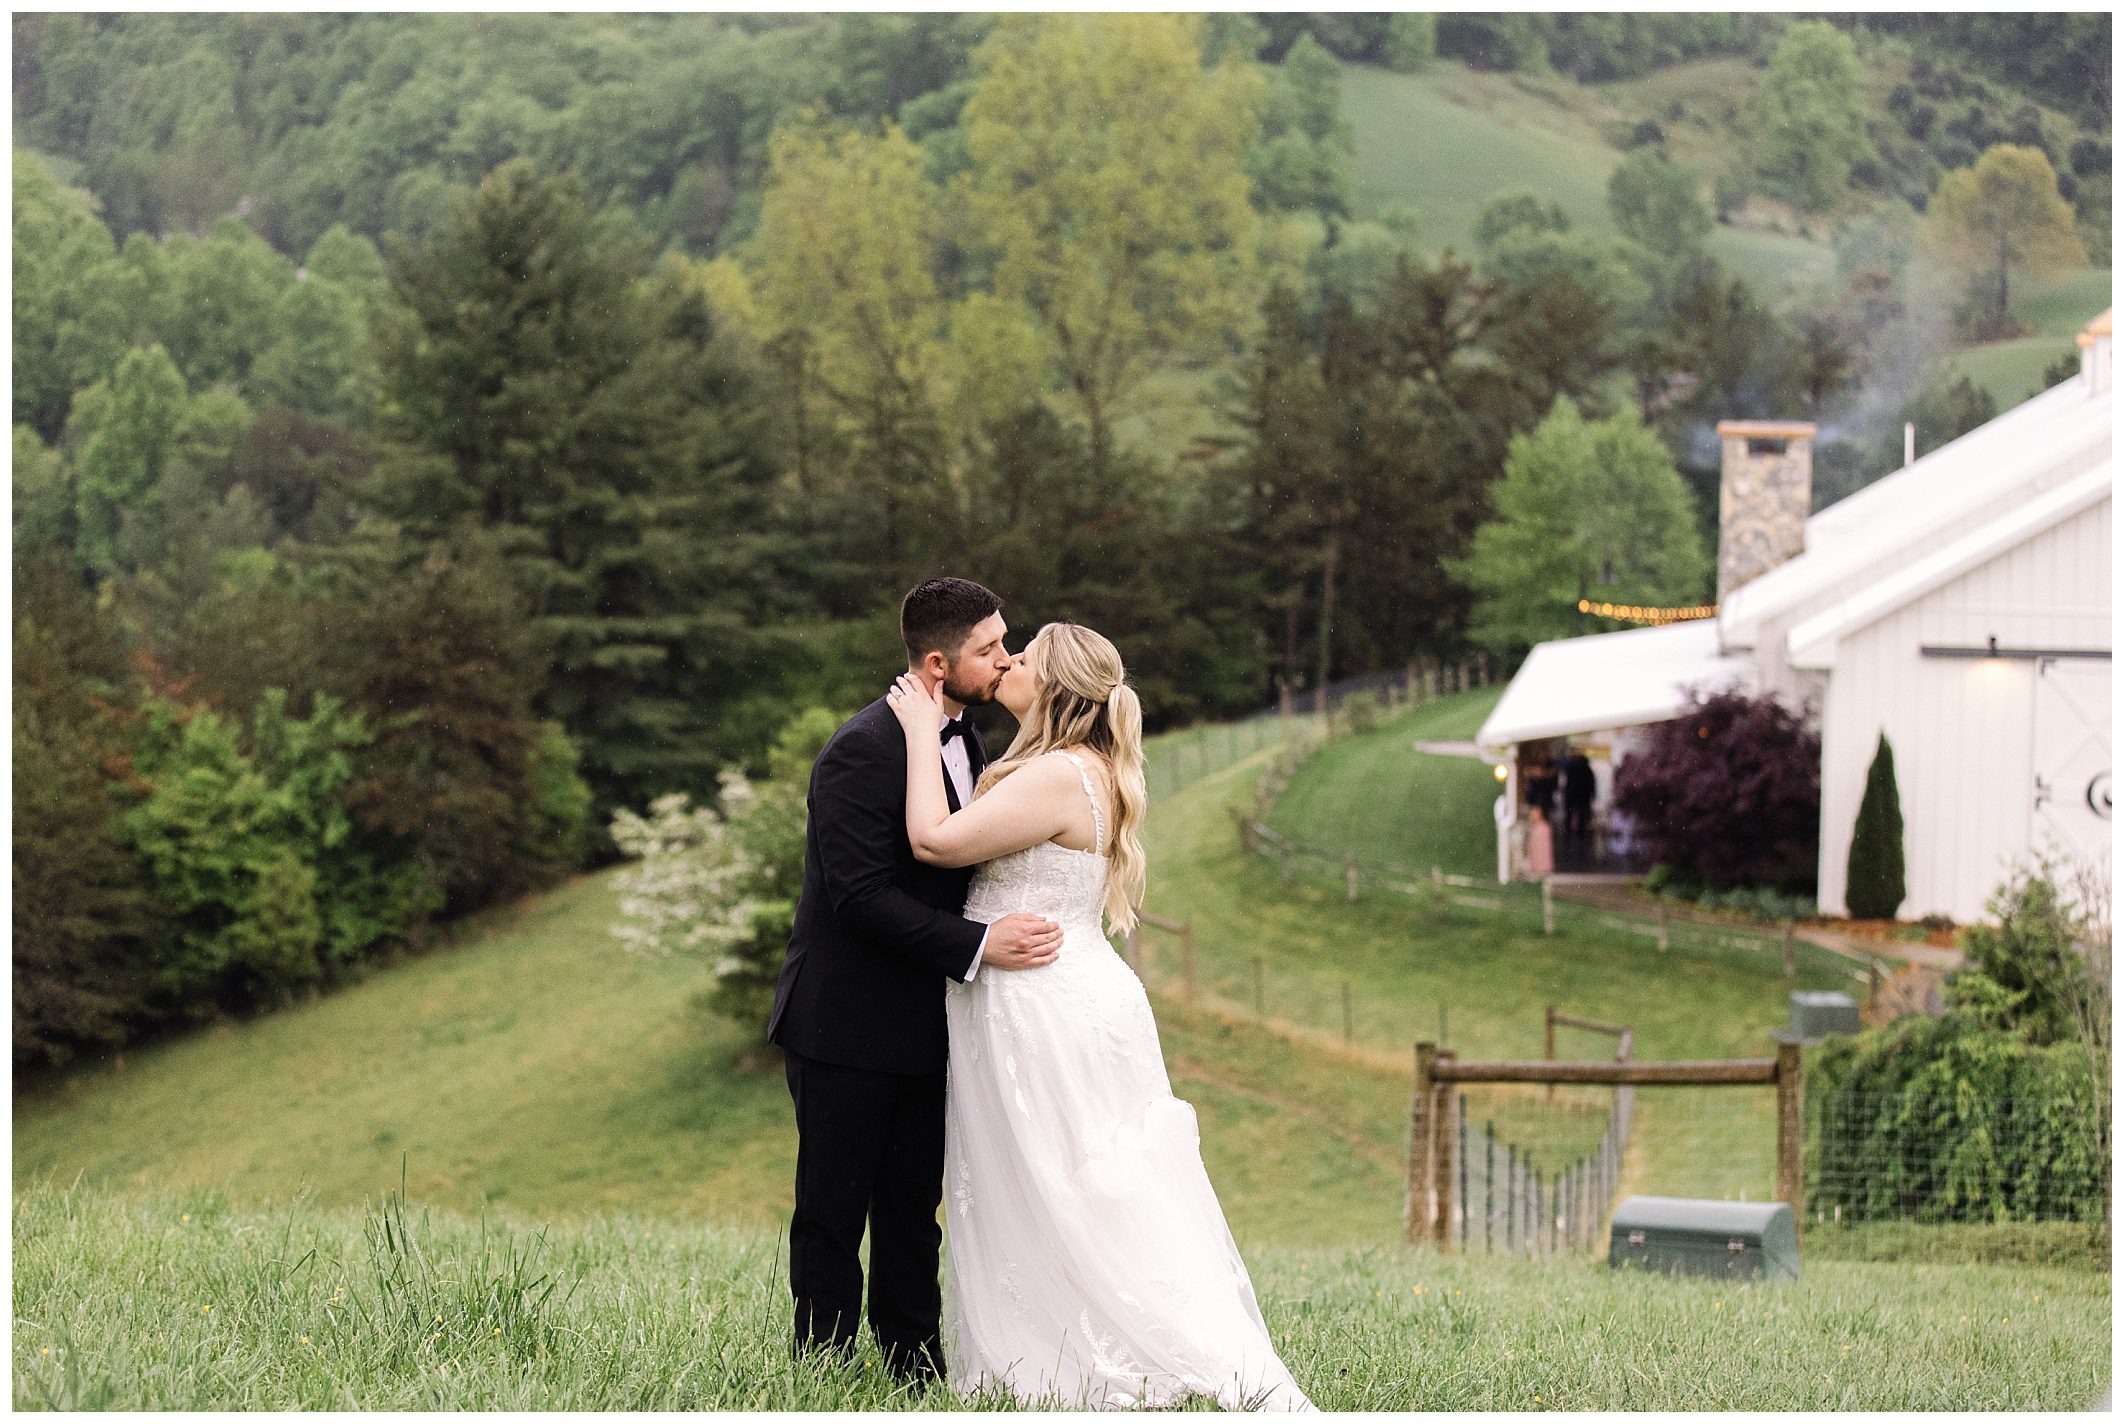 A bride and groom kiss in a scenic outdoor setting with green hills and a quaint building in the background during a mountain wedding at Chestnut Ridge.